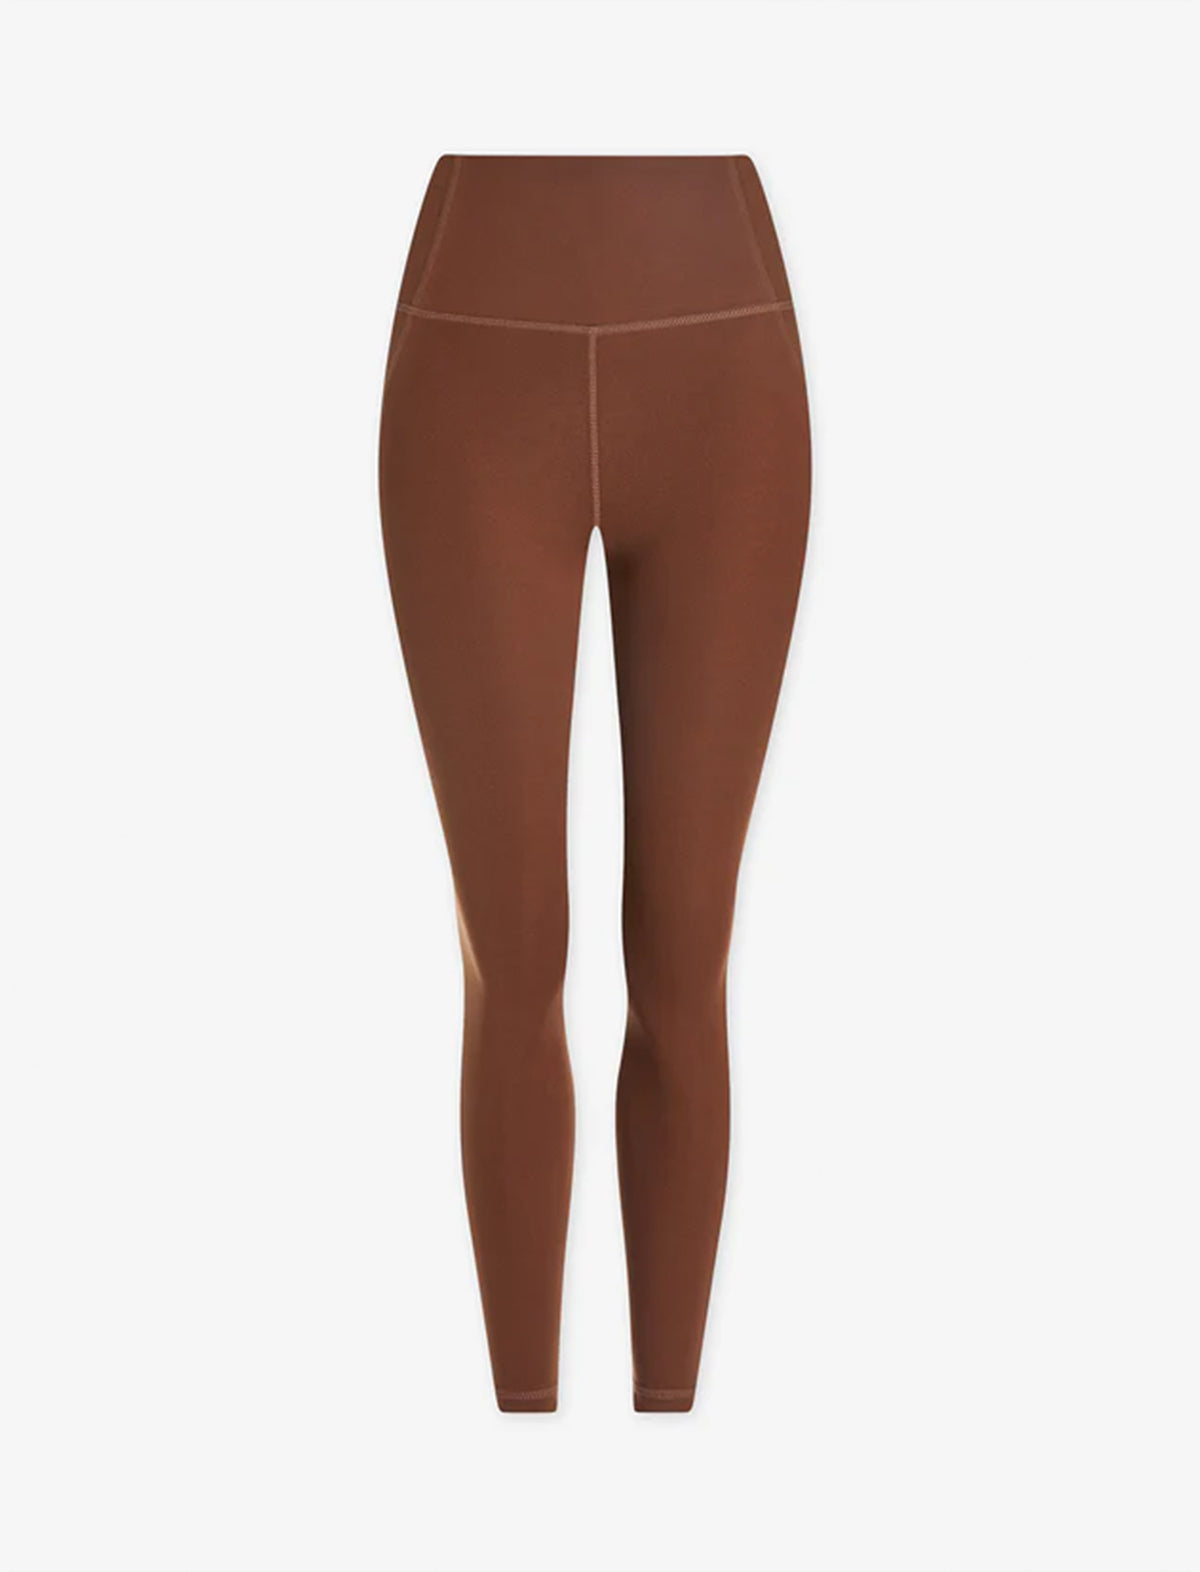 VARLEY Move Pocket Legging High 25" In Cocoa Brown